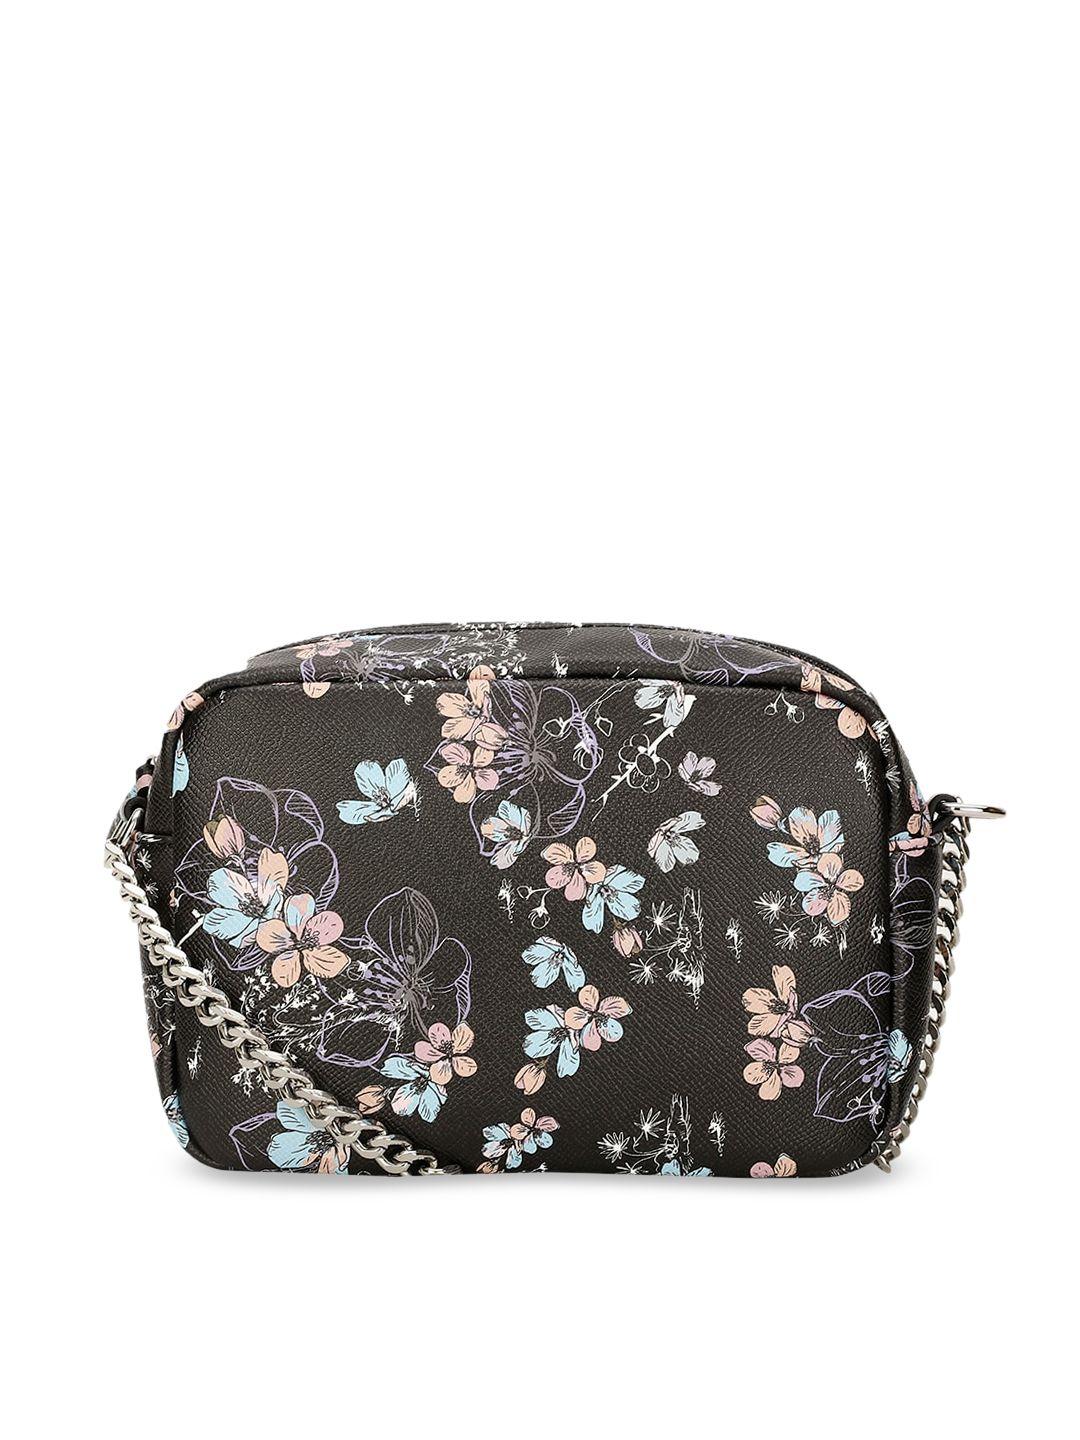 marie claire floral printed structured sling bag